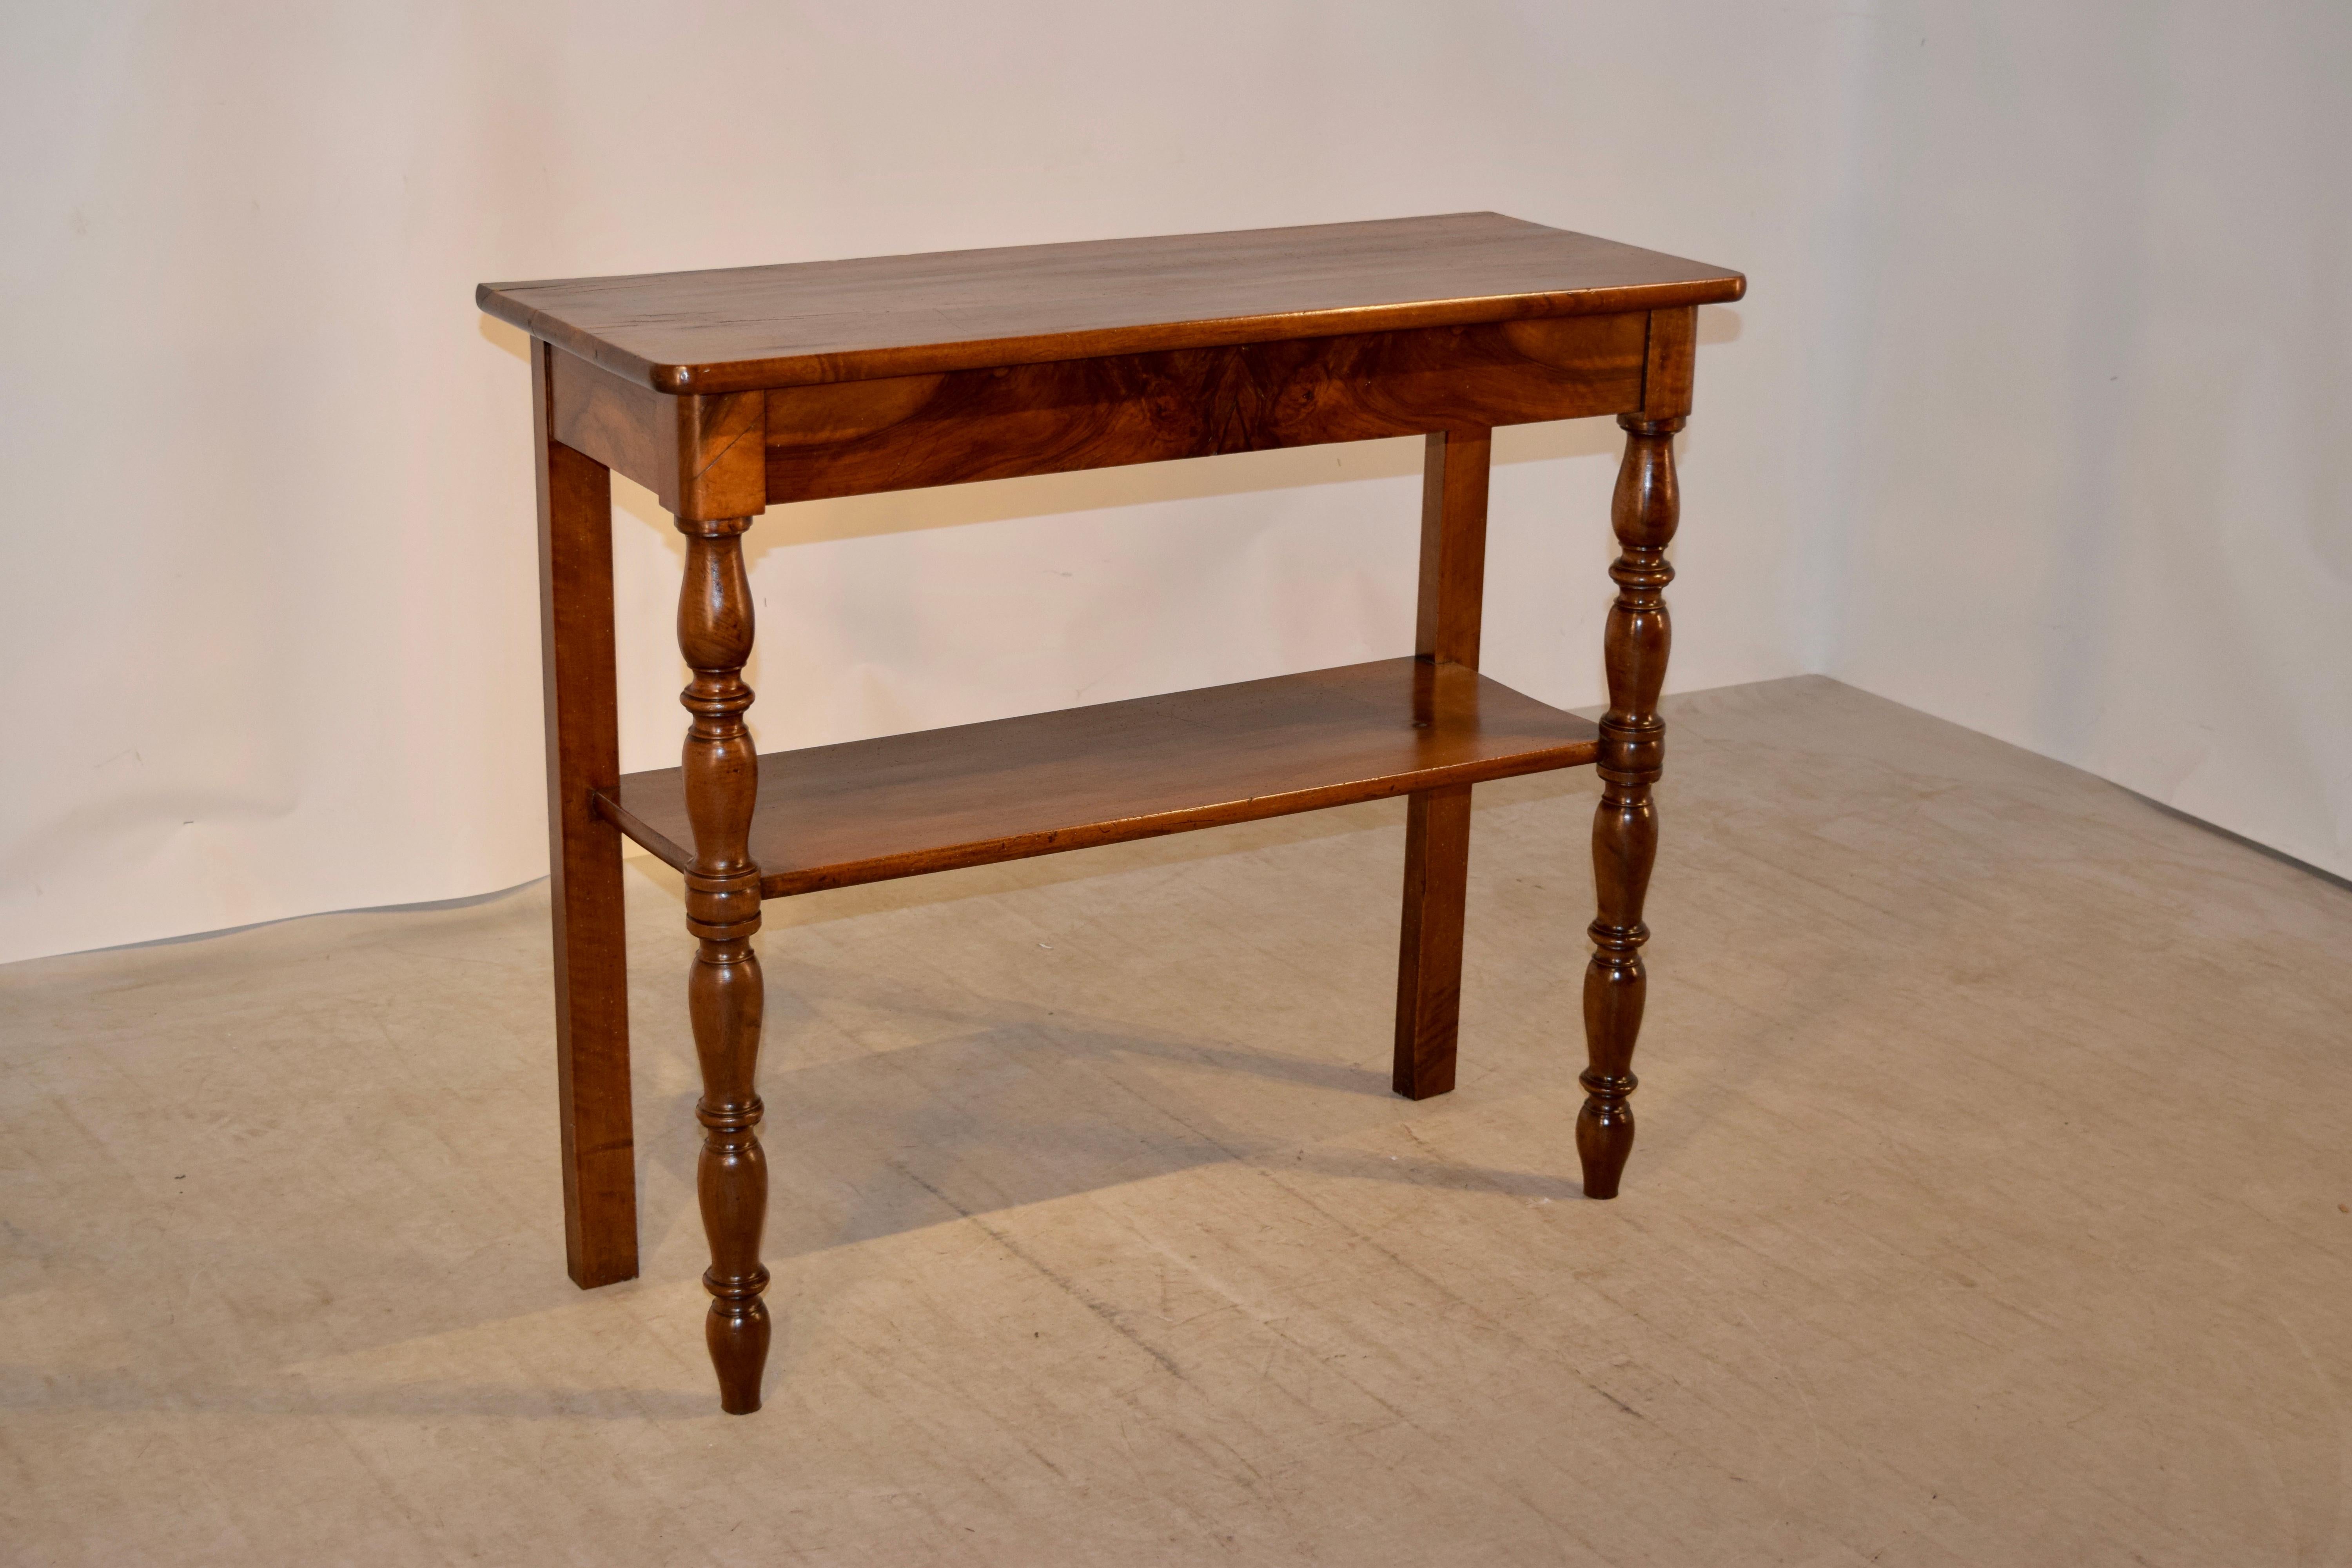 19th century Louis Philippe console made from walnut. The top is wonderfully grained and has shrinkage from age. This follows down to a simple apron and supported on hand-turned legs in the front and simple legs in the back for easy placement